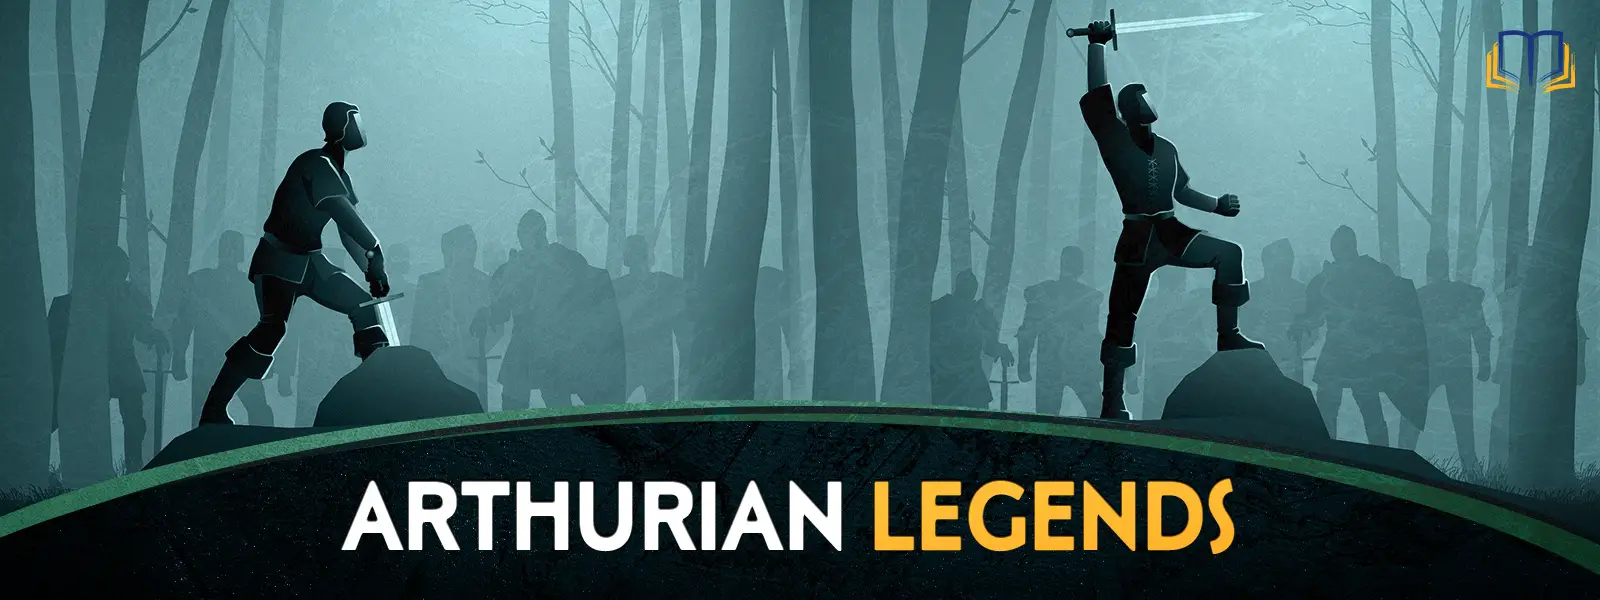 banner image that says arthurian legends